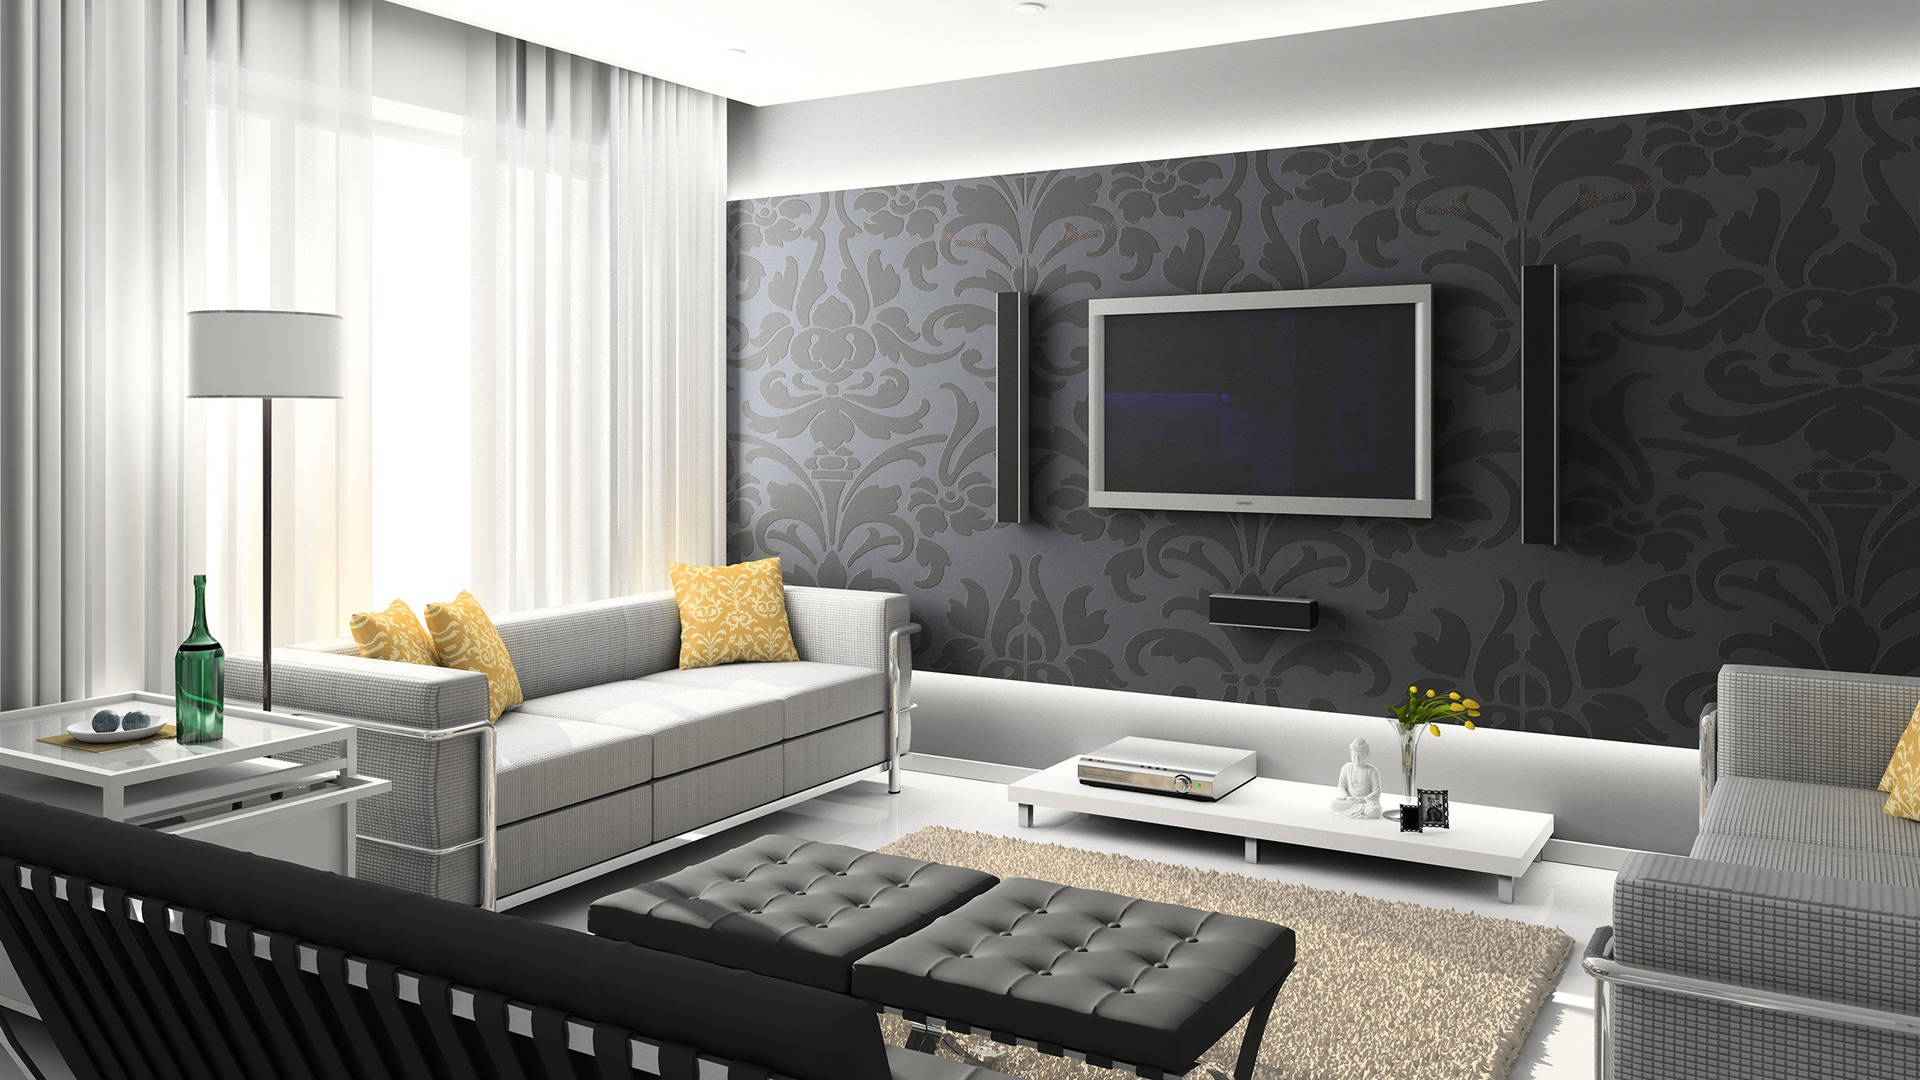 Luxurious Living Room With Black Wall Paint Art